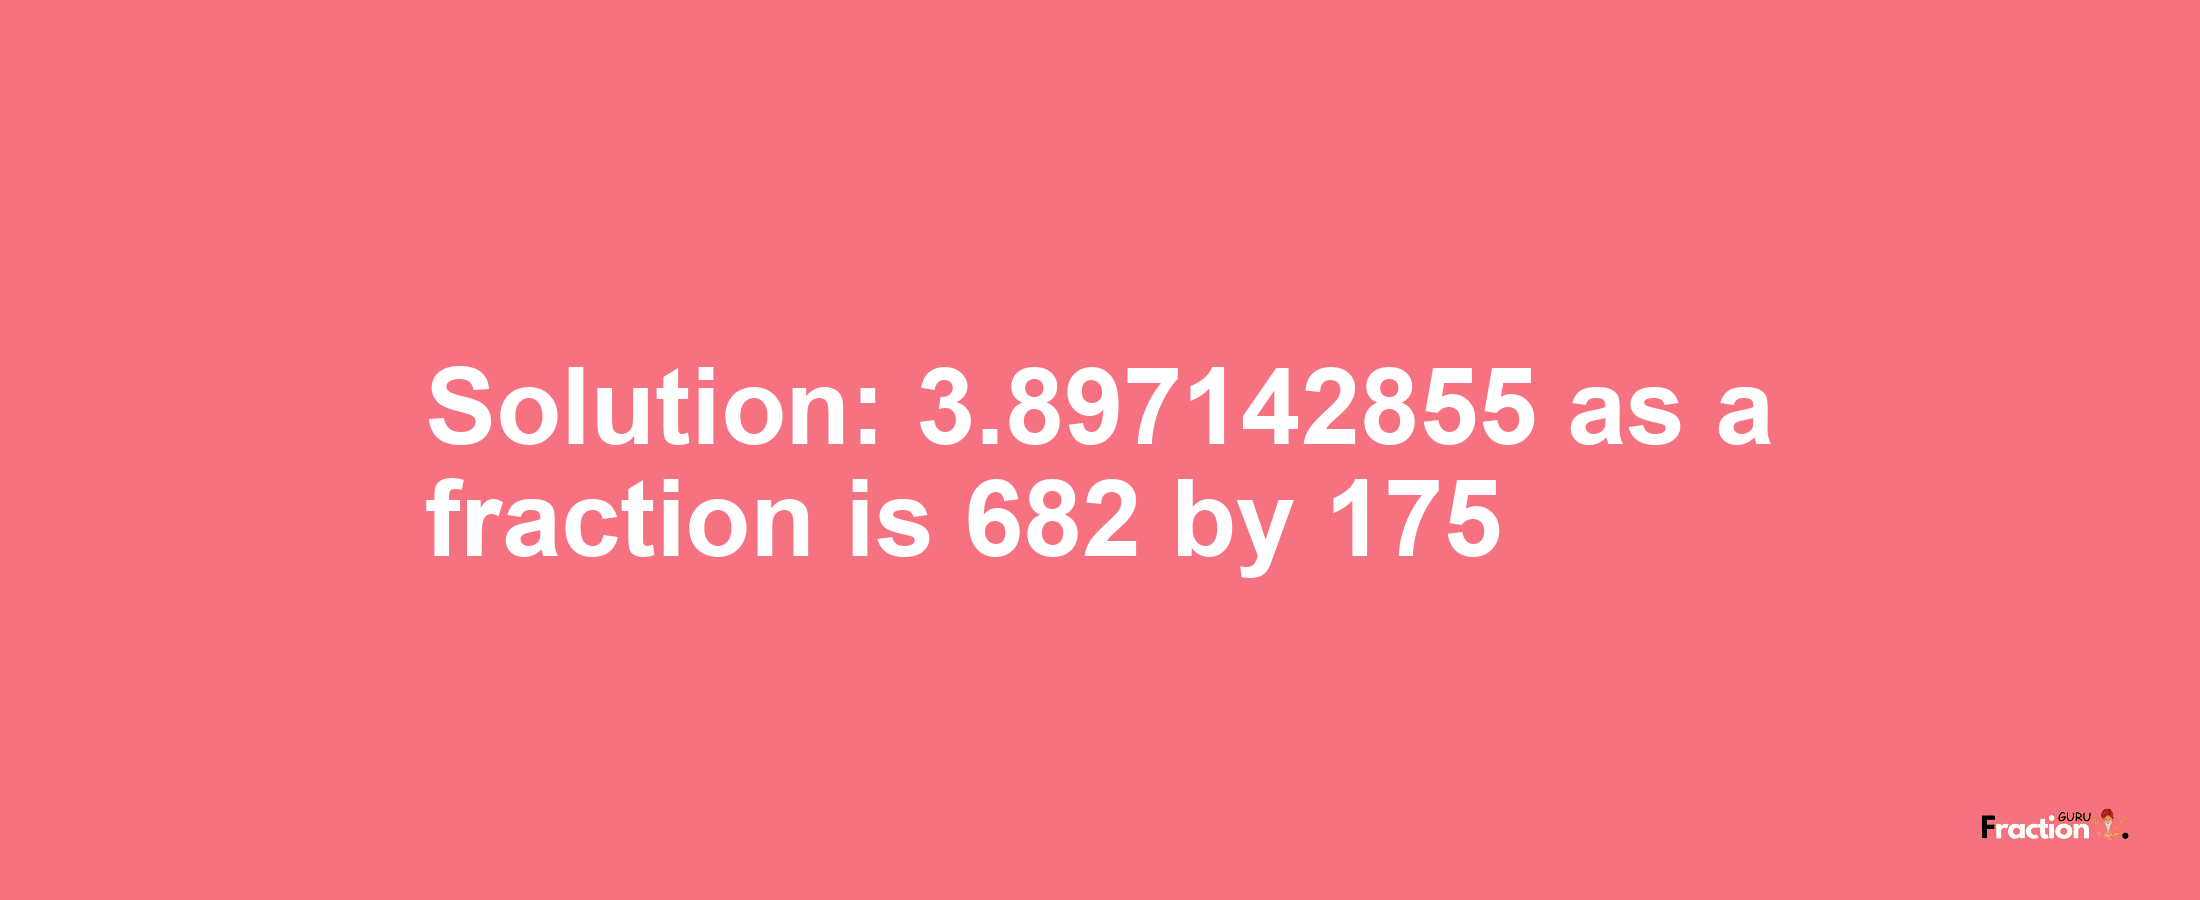 Solution:3.897142855 as a fraction is 682/175